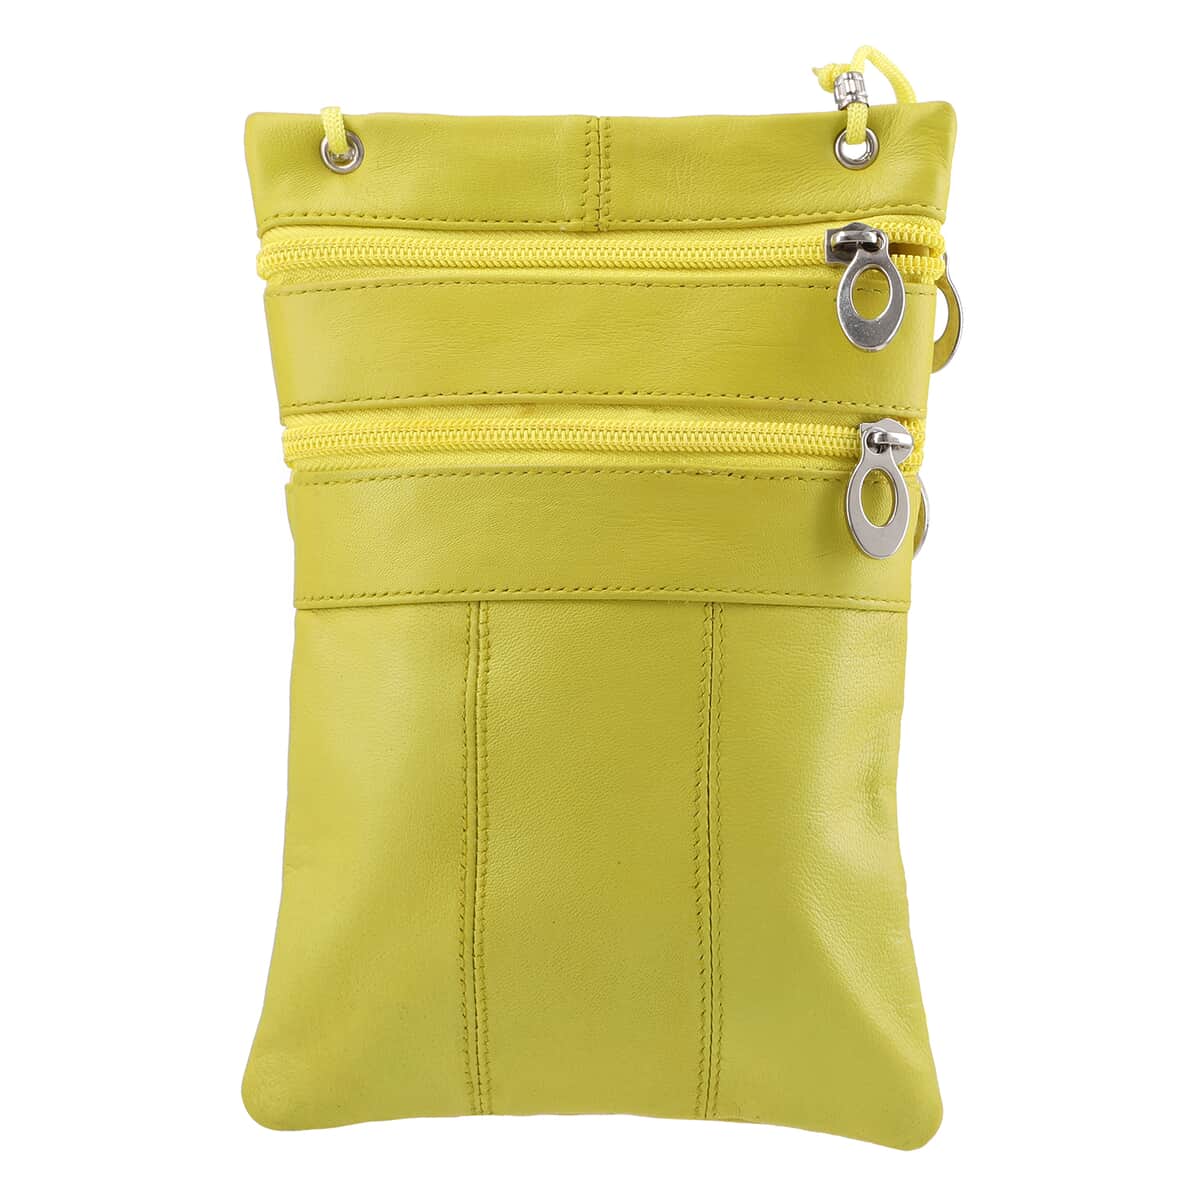 Newage Yellow 100% Genuine Leather Crossbody Bag with Man-made Strap image number 3